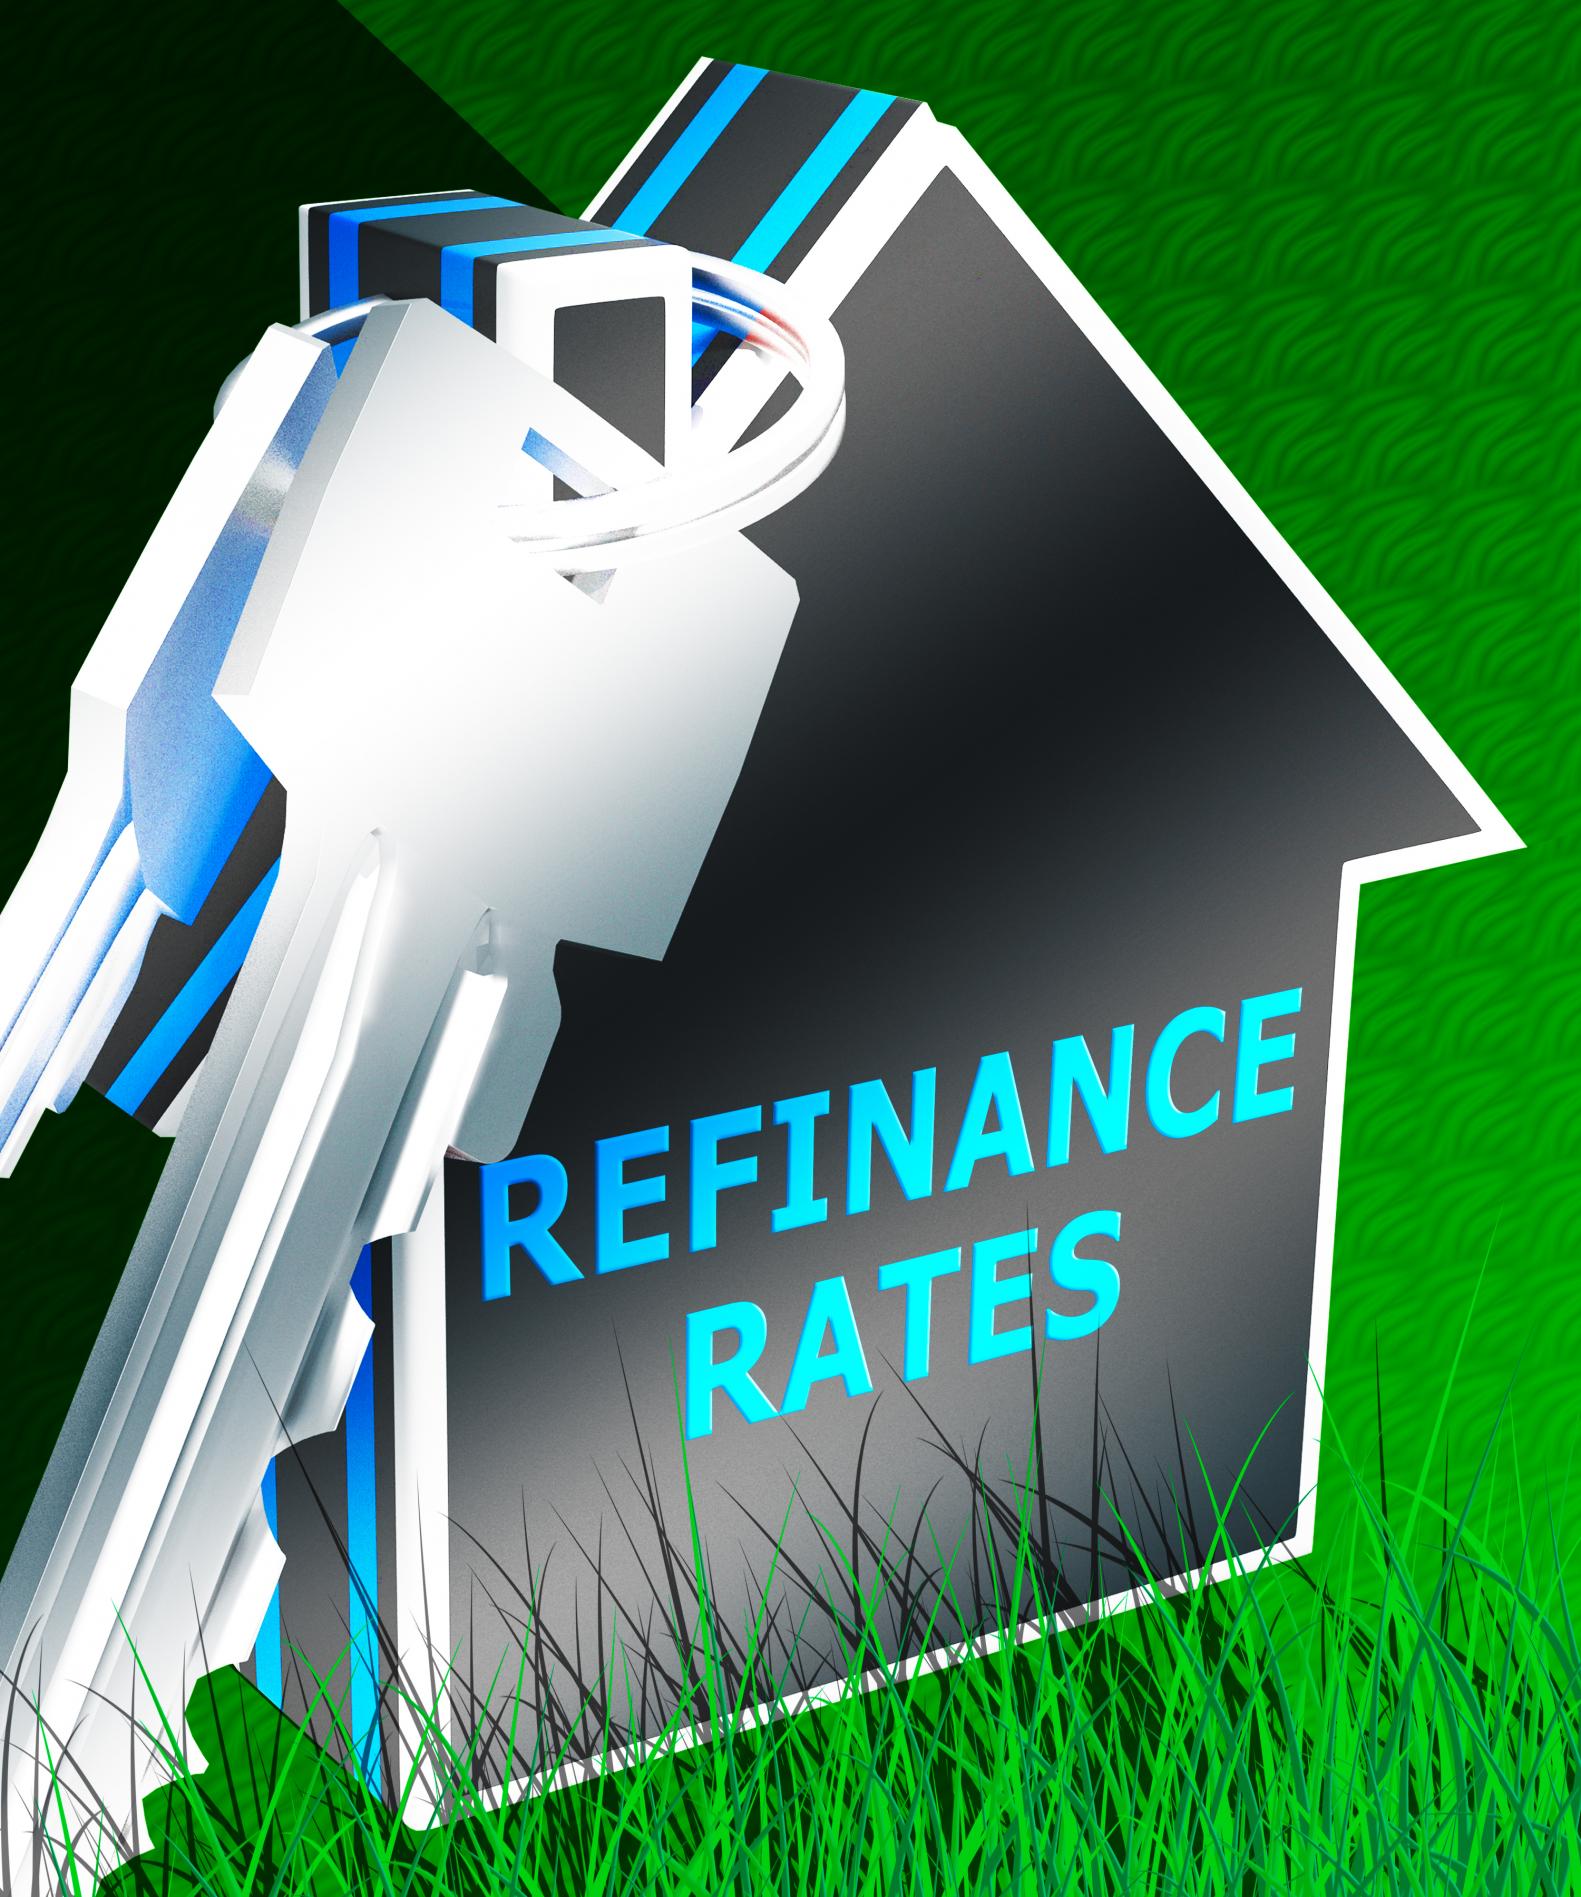 Best Refinance Rates for Your Mortgage